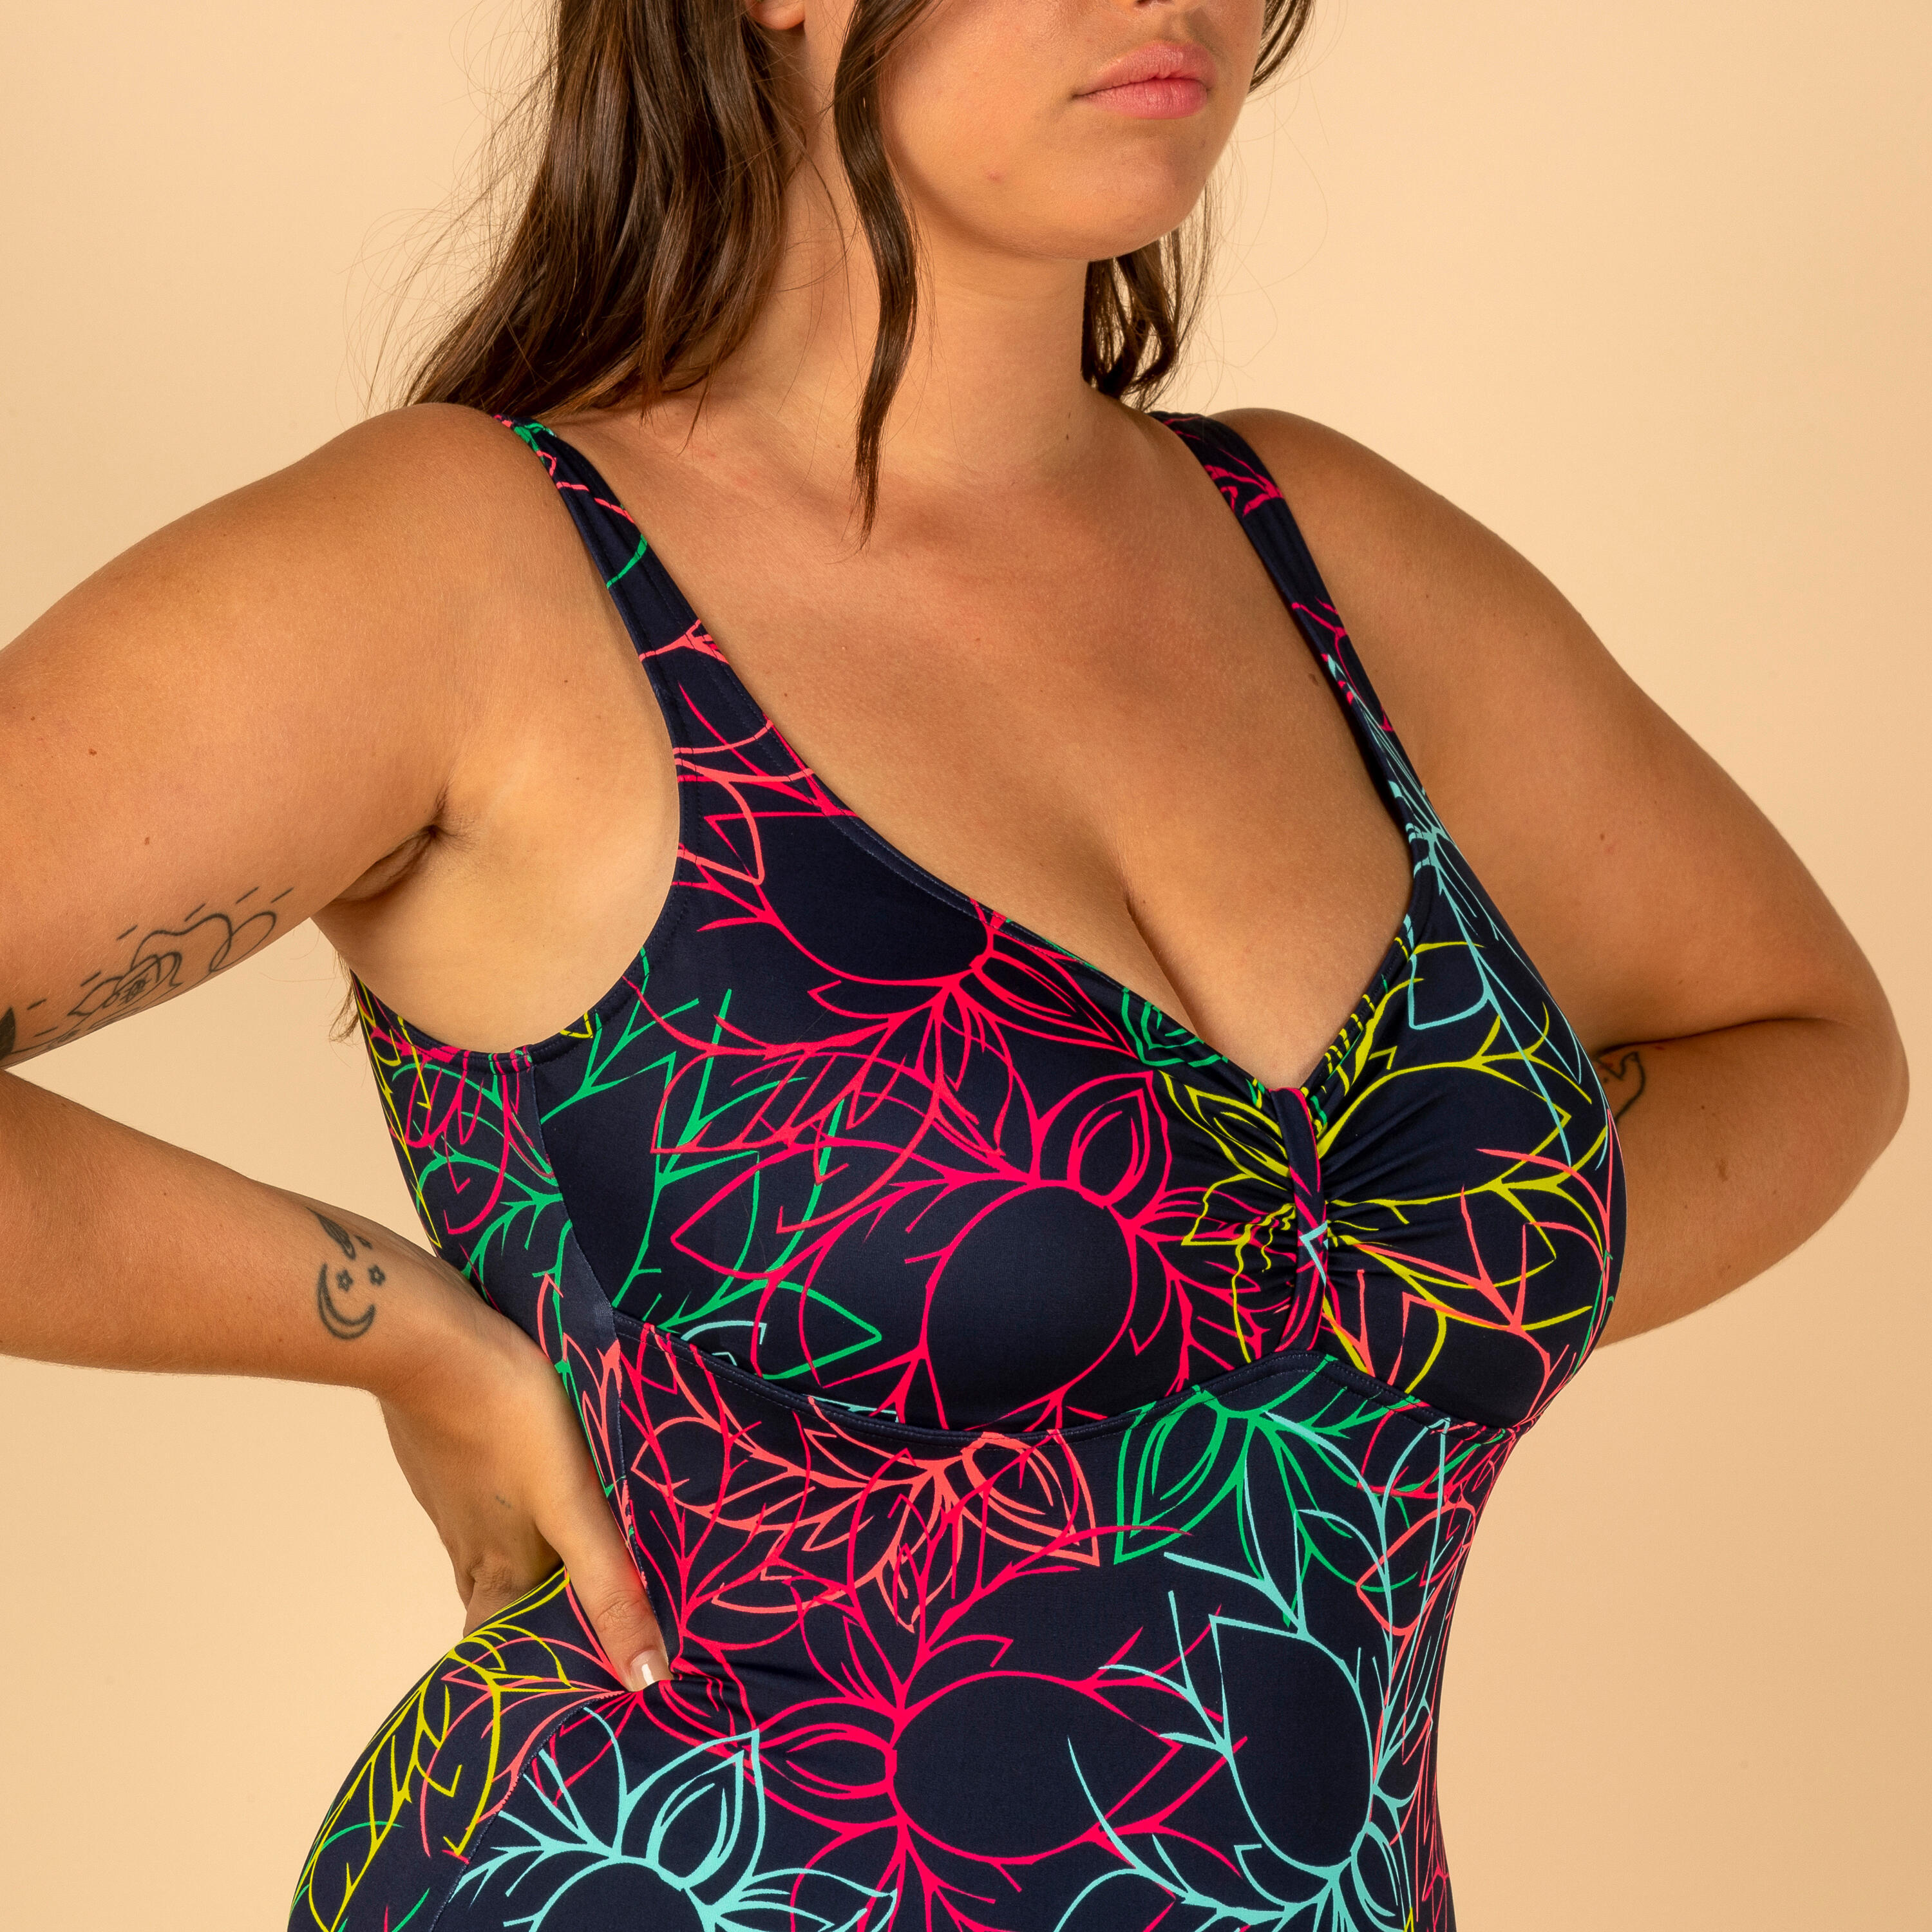 Refurbished Womens 1-Piece Body-Sculpting Swimsuit - A Grade 6/7